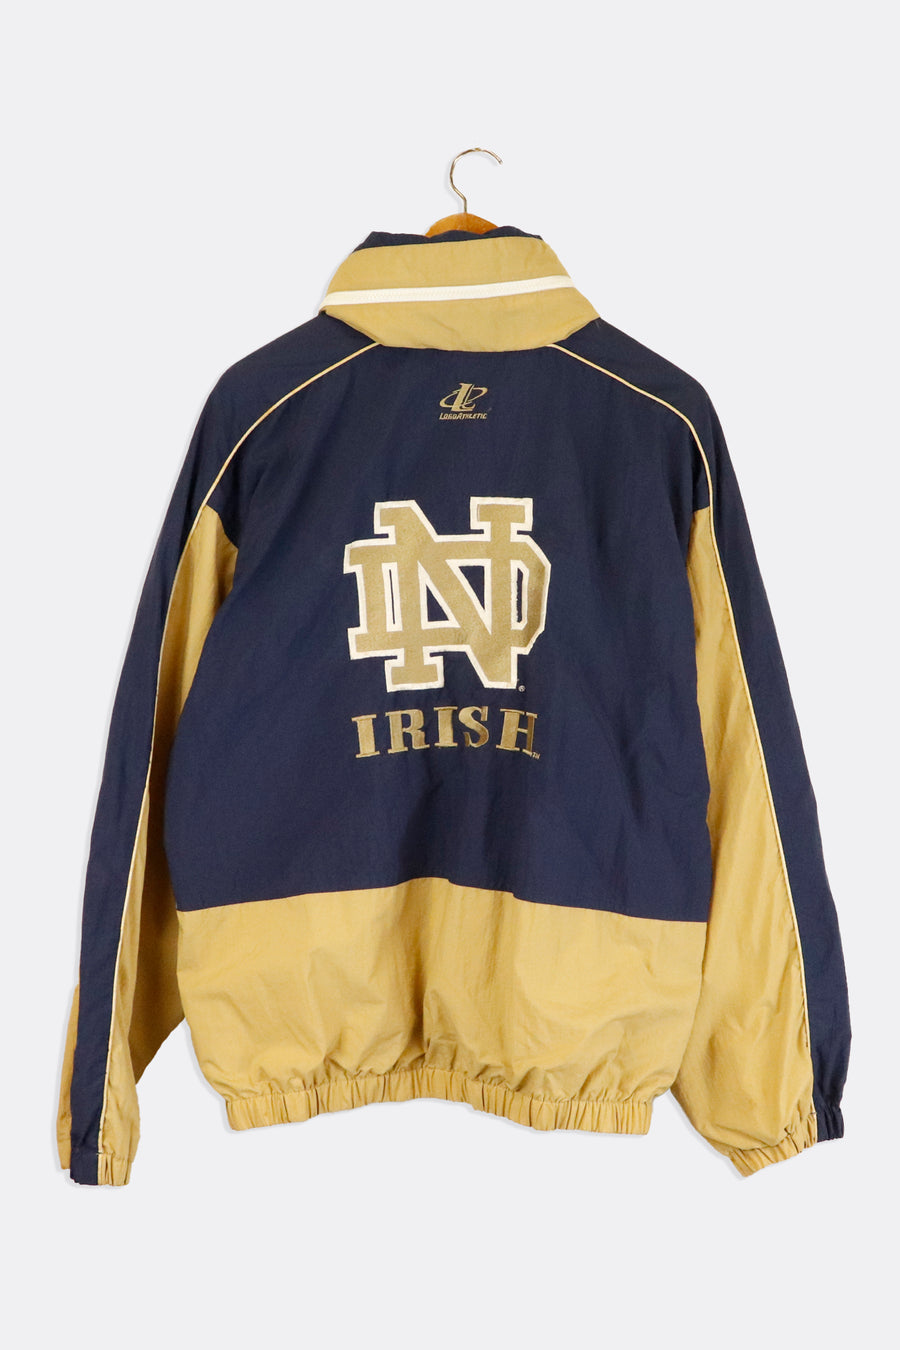 Vintage NCAA Notre Dame Fighting Irish Full Zip Removable Hood Embroidered Jacket Outerwear Sz M